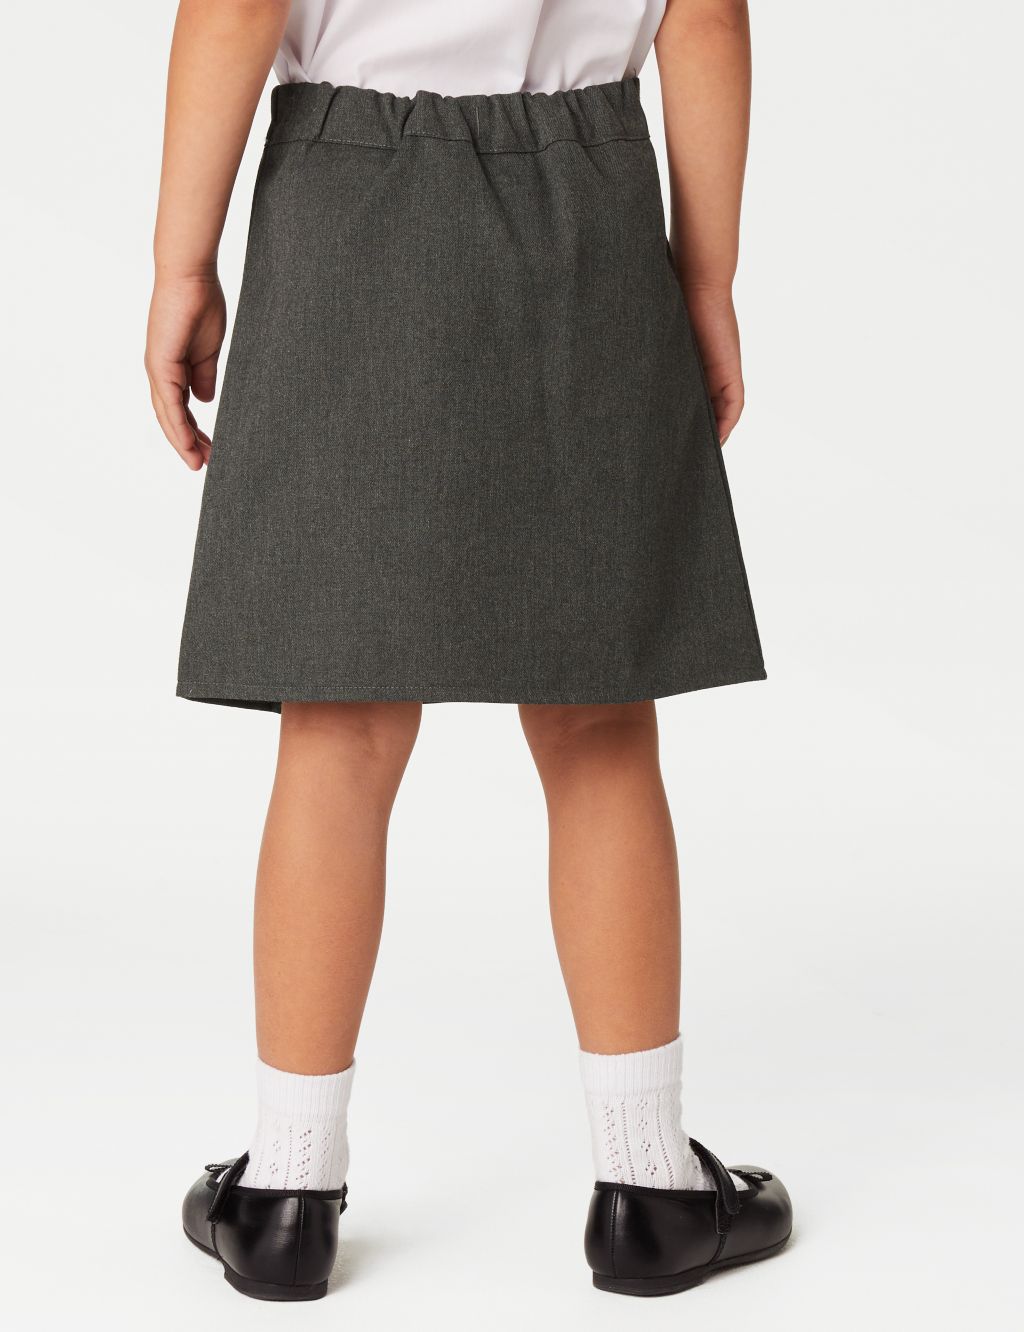 2pk Girls' Embroidered School Skirts (2-18 Yrs) image 4